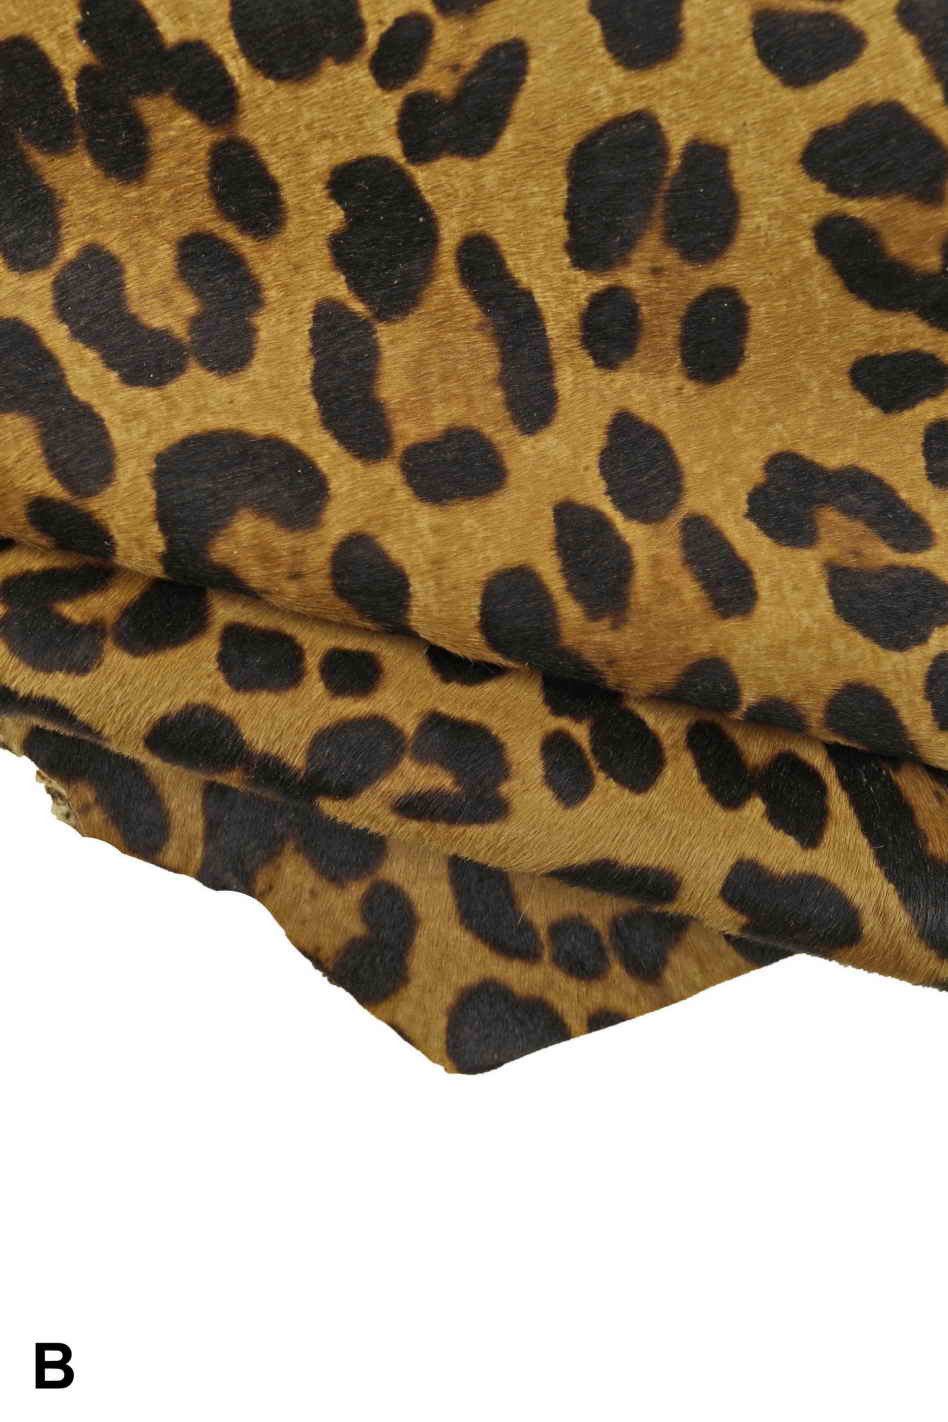 Hair On Cheetah Print Cowhide, 1.2 - 1.4 mm, A Sizes - Leather4Craft